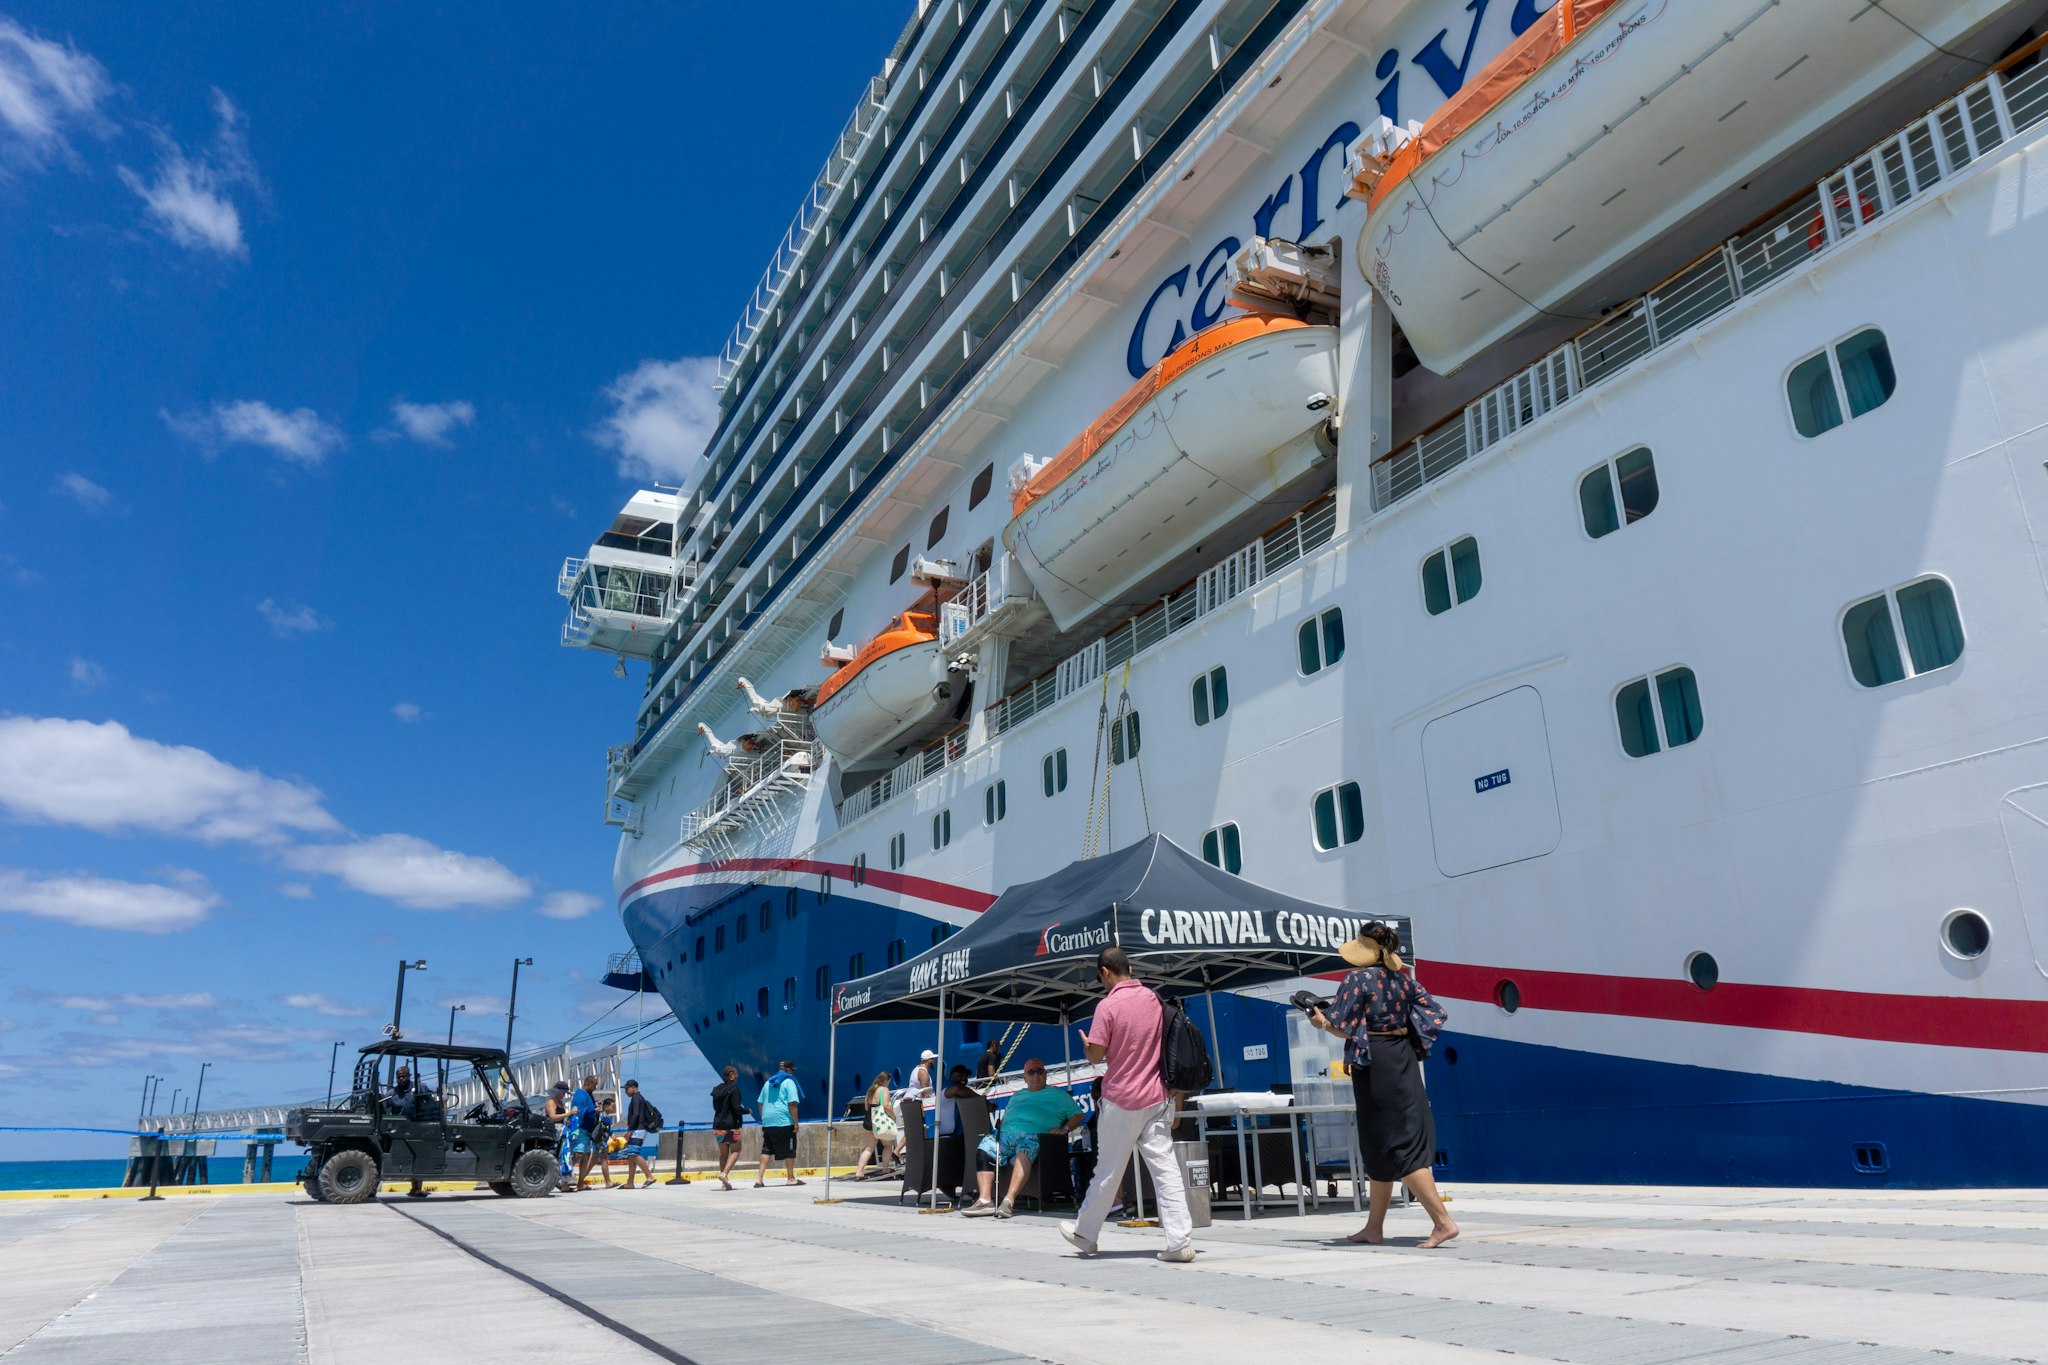 Carnival Conquest docked in Bimini, Bahamas on April 14, 2024 (Photo: Aaron Saunders)